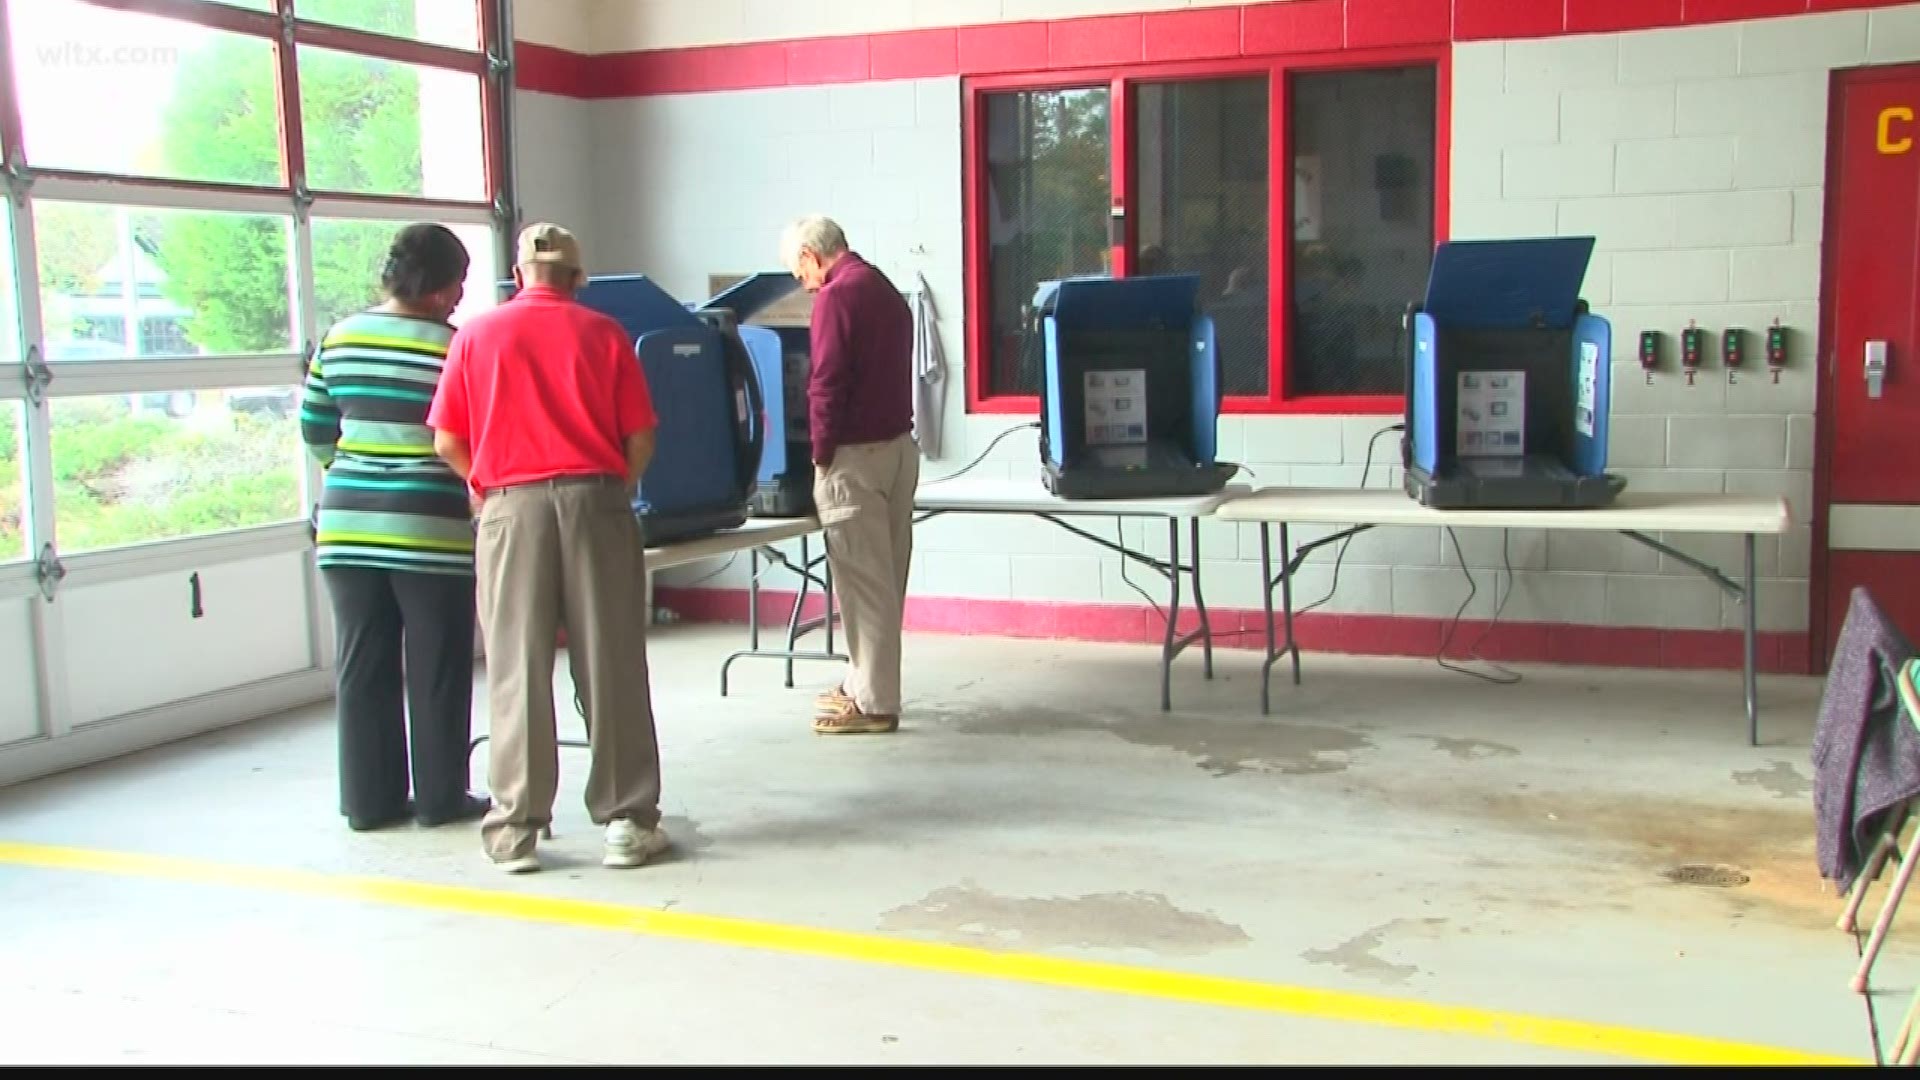 South Carolina is getting a new voting system that will be based on paper, the system cost the state $51 million.